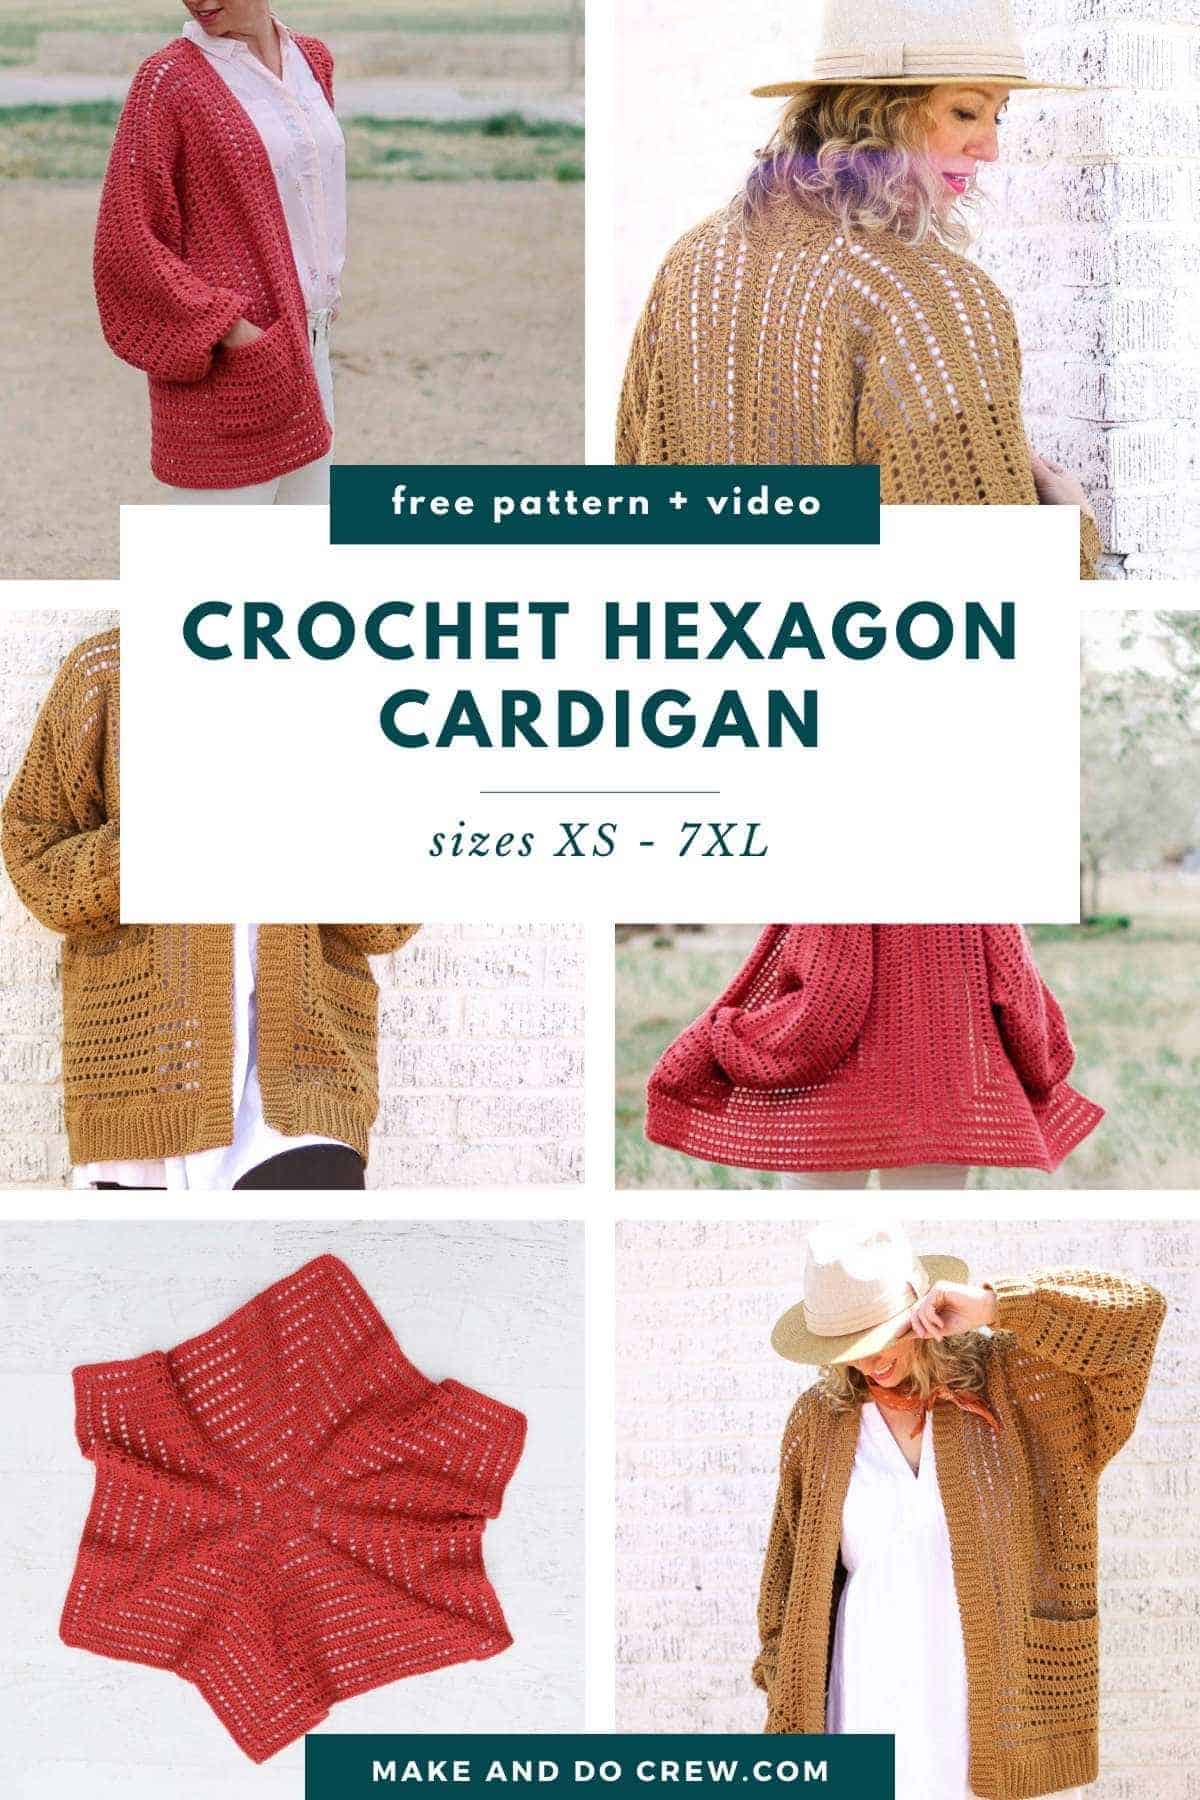 Collection of crochet hexagon cardigan pattern with sizes XS to 7XL.